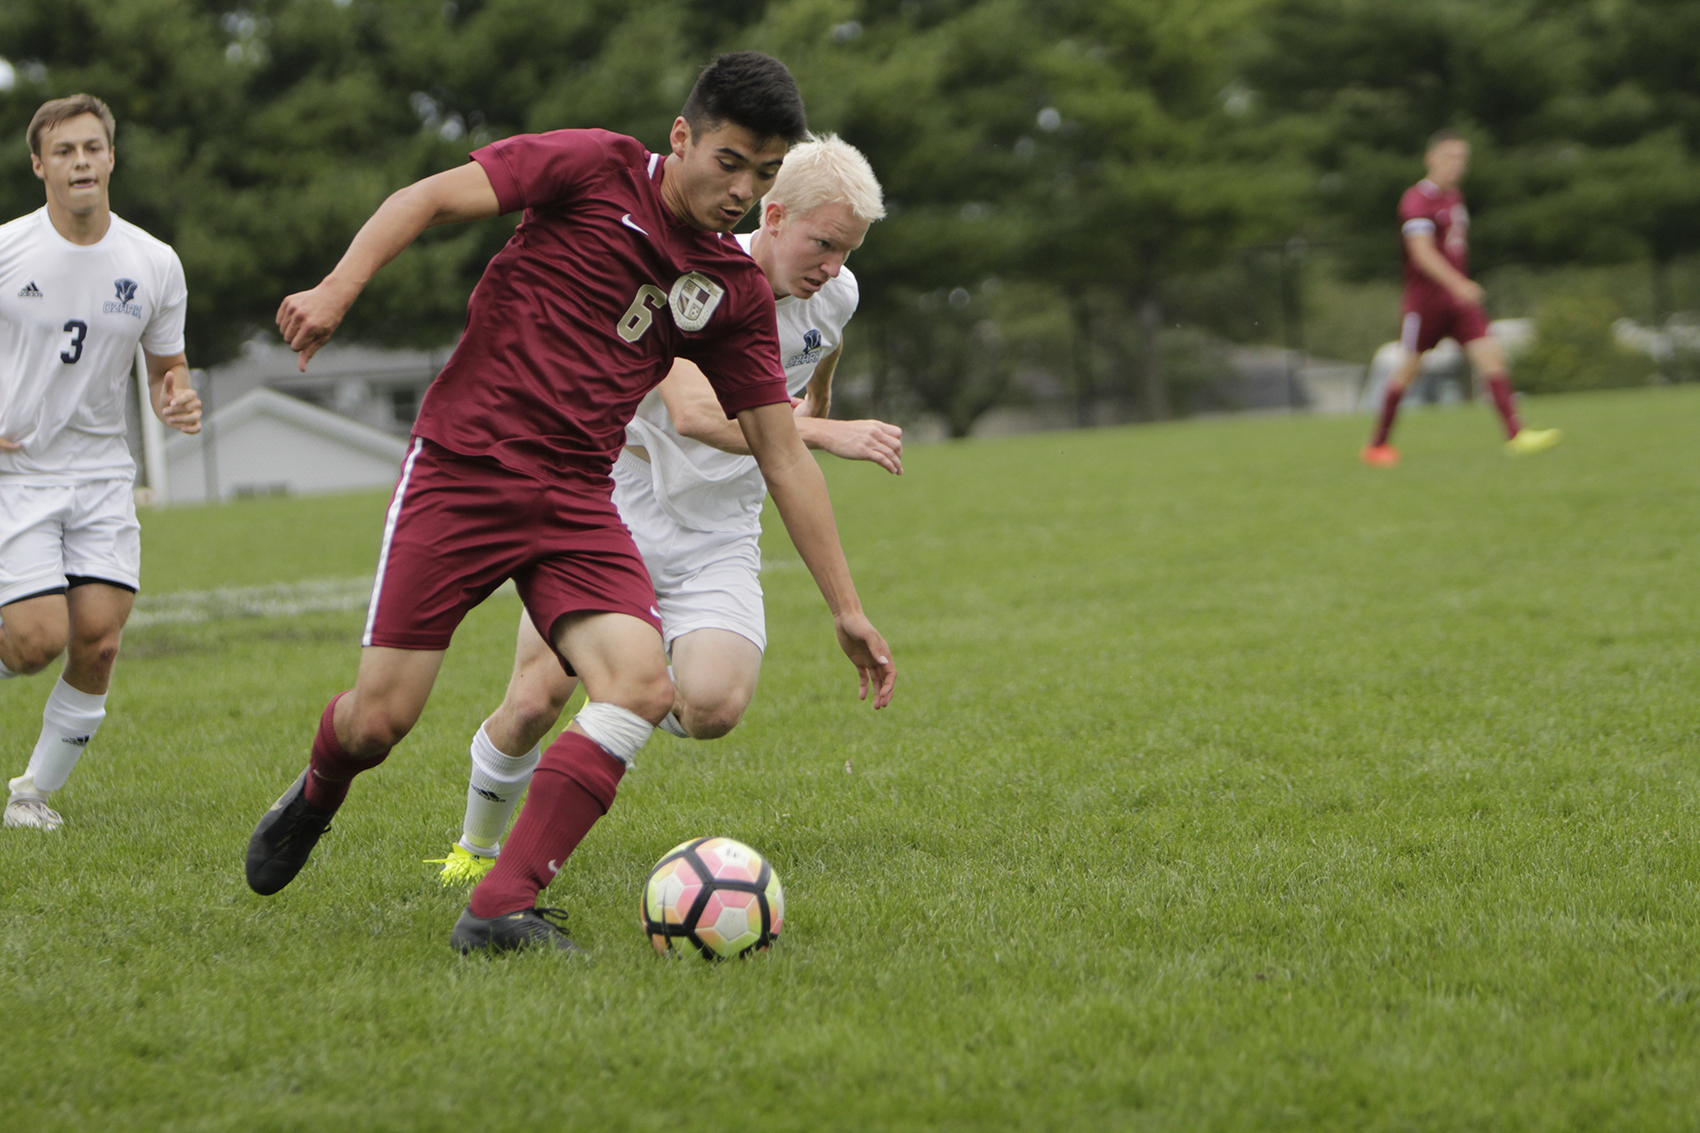 Josiah Choi's goal against Ozark Christian capped a thrilling weekend for men's soccer (Photo credit: Andrew Gogerty)